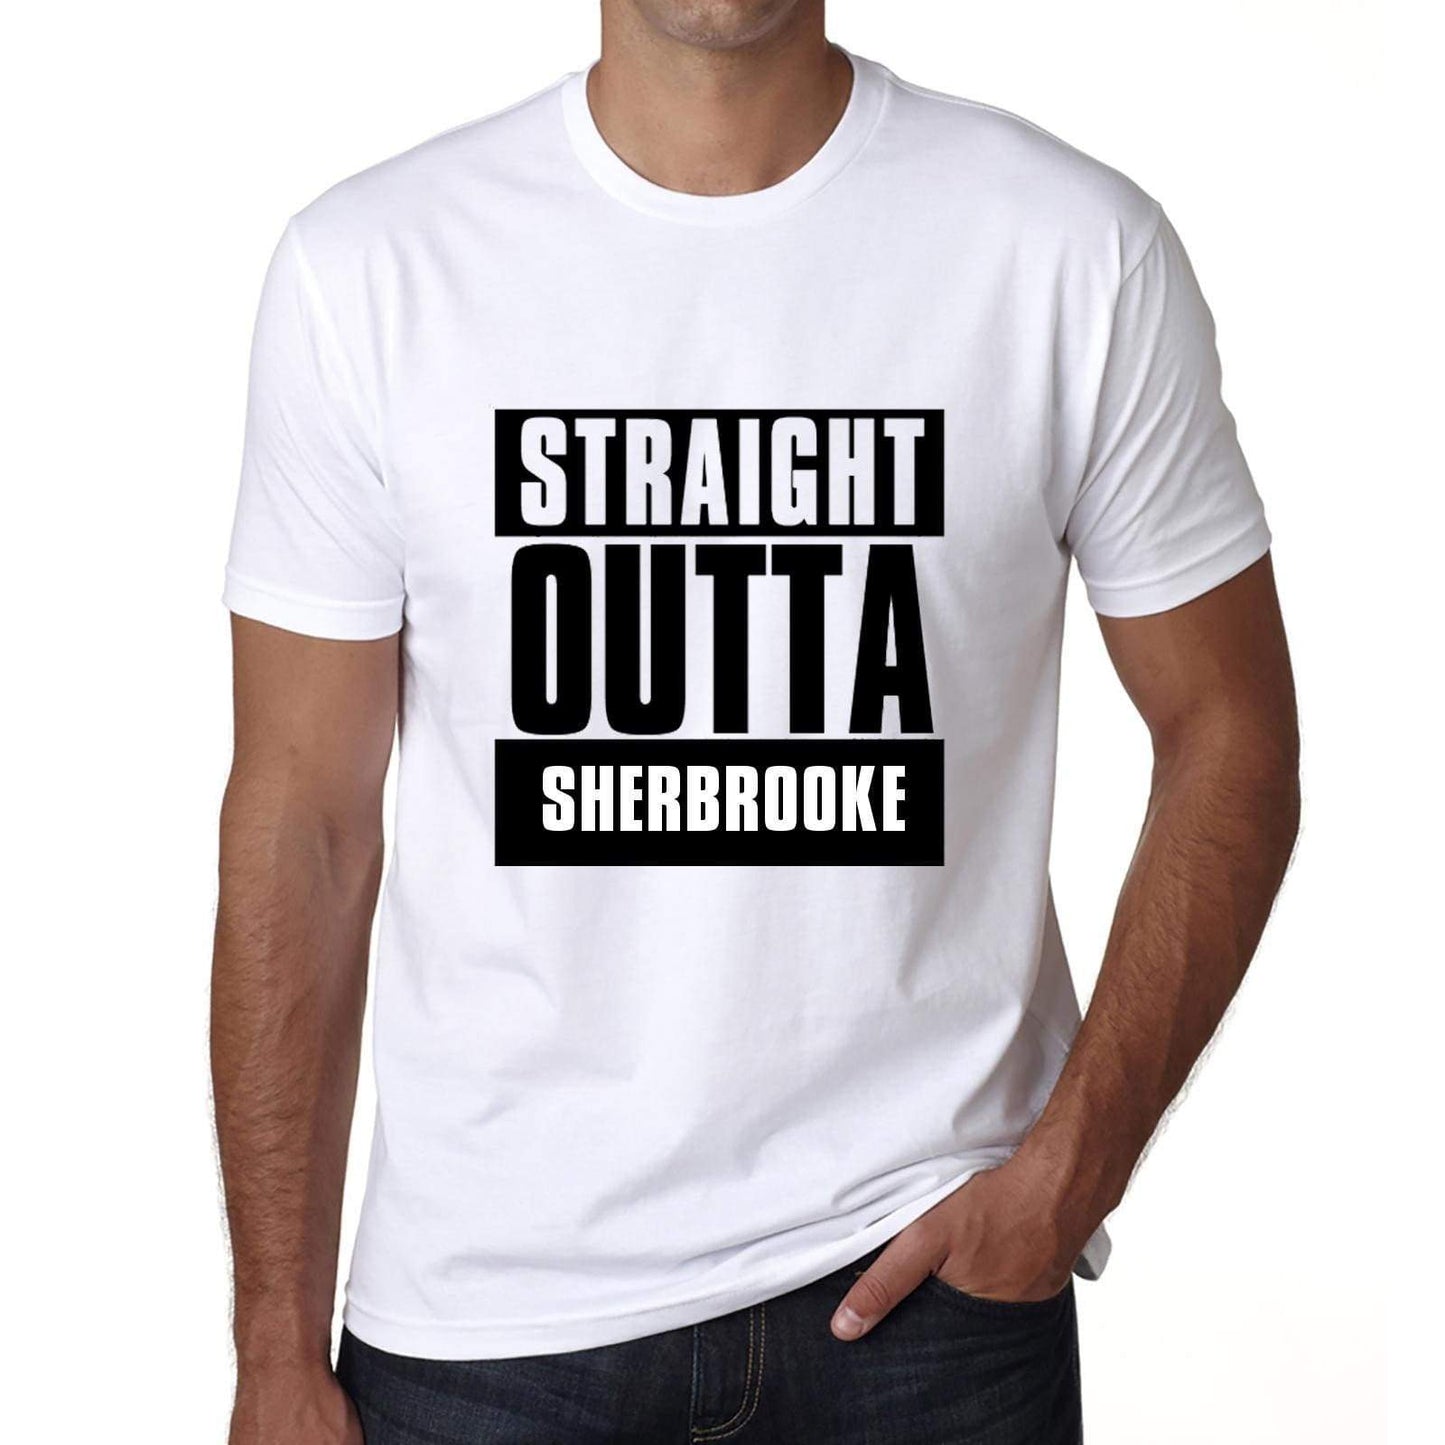 Straight Outta Sherbrooke Mens Short Sleeve Round Neck T-Shirt 00027 - White / S - Casual